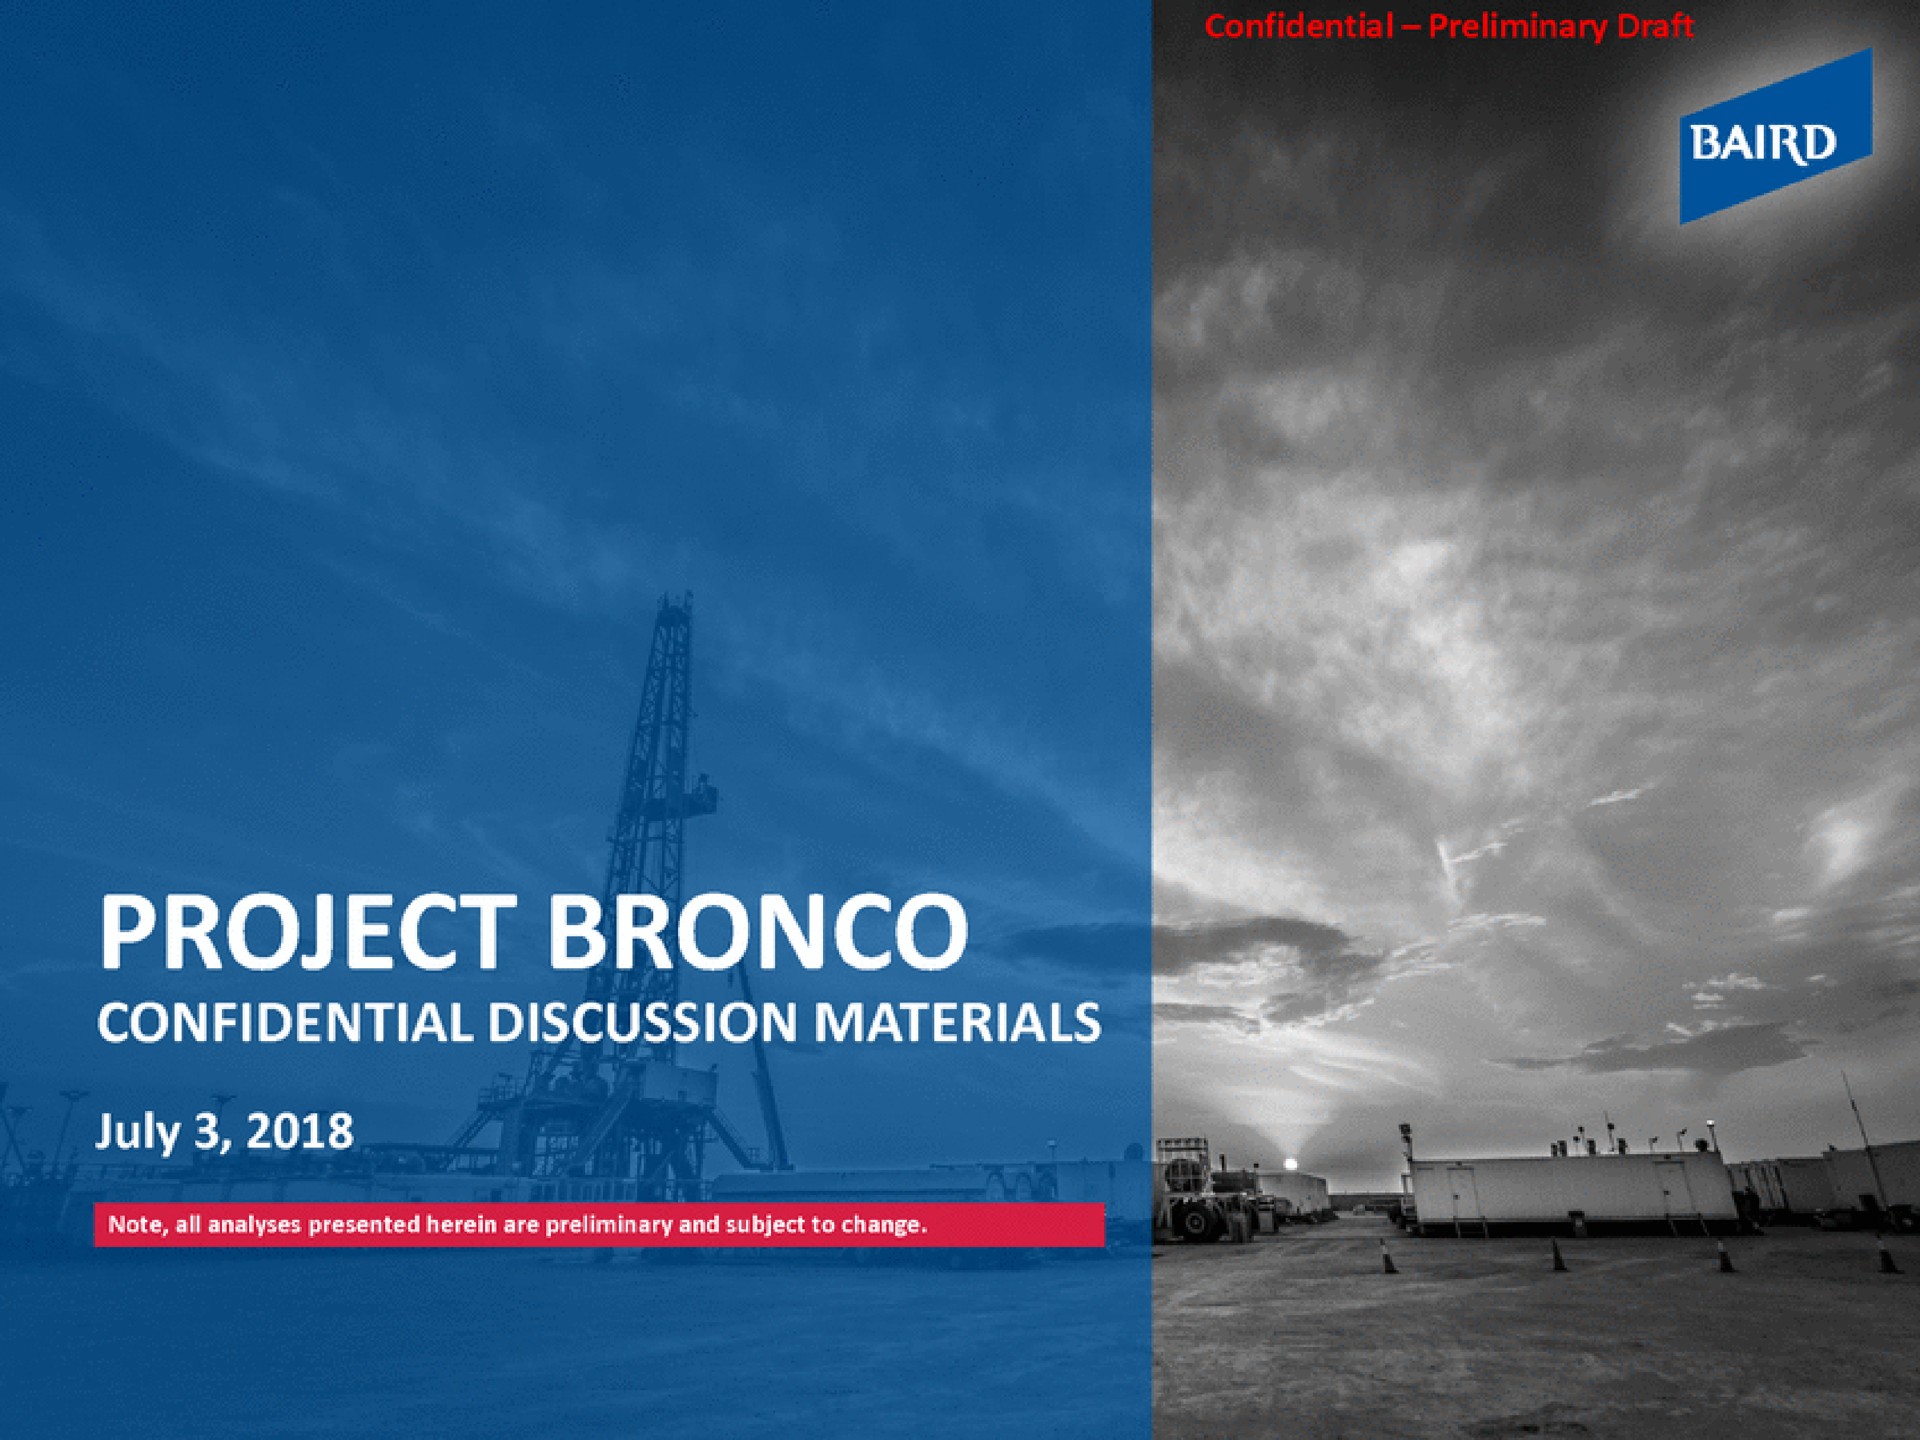 project bronco confidential discussion materials | Baird